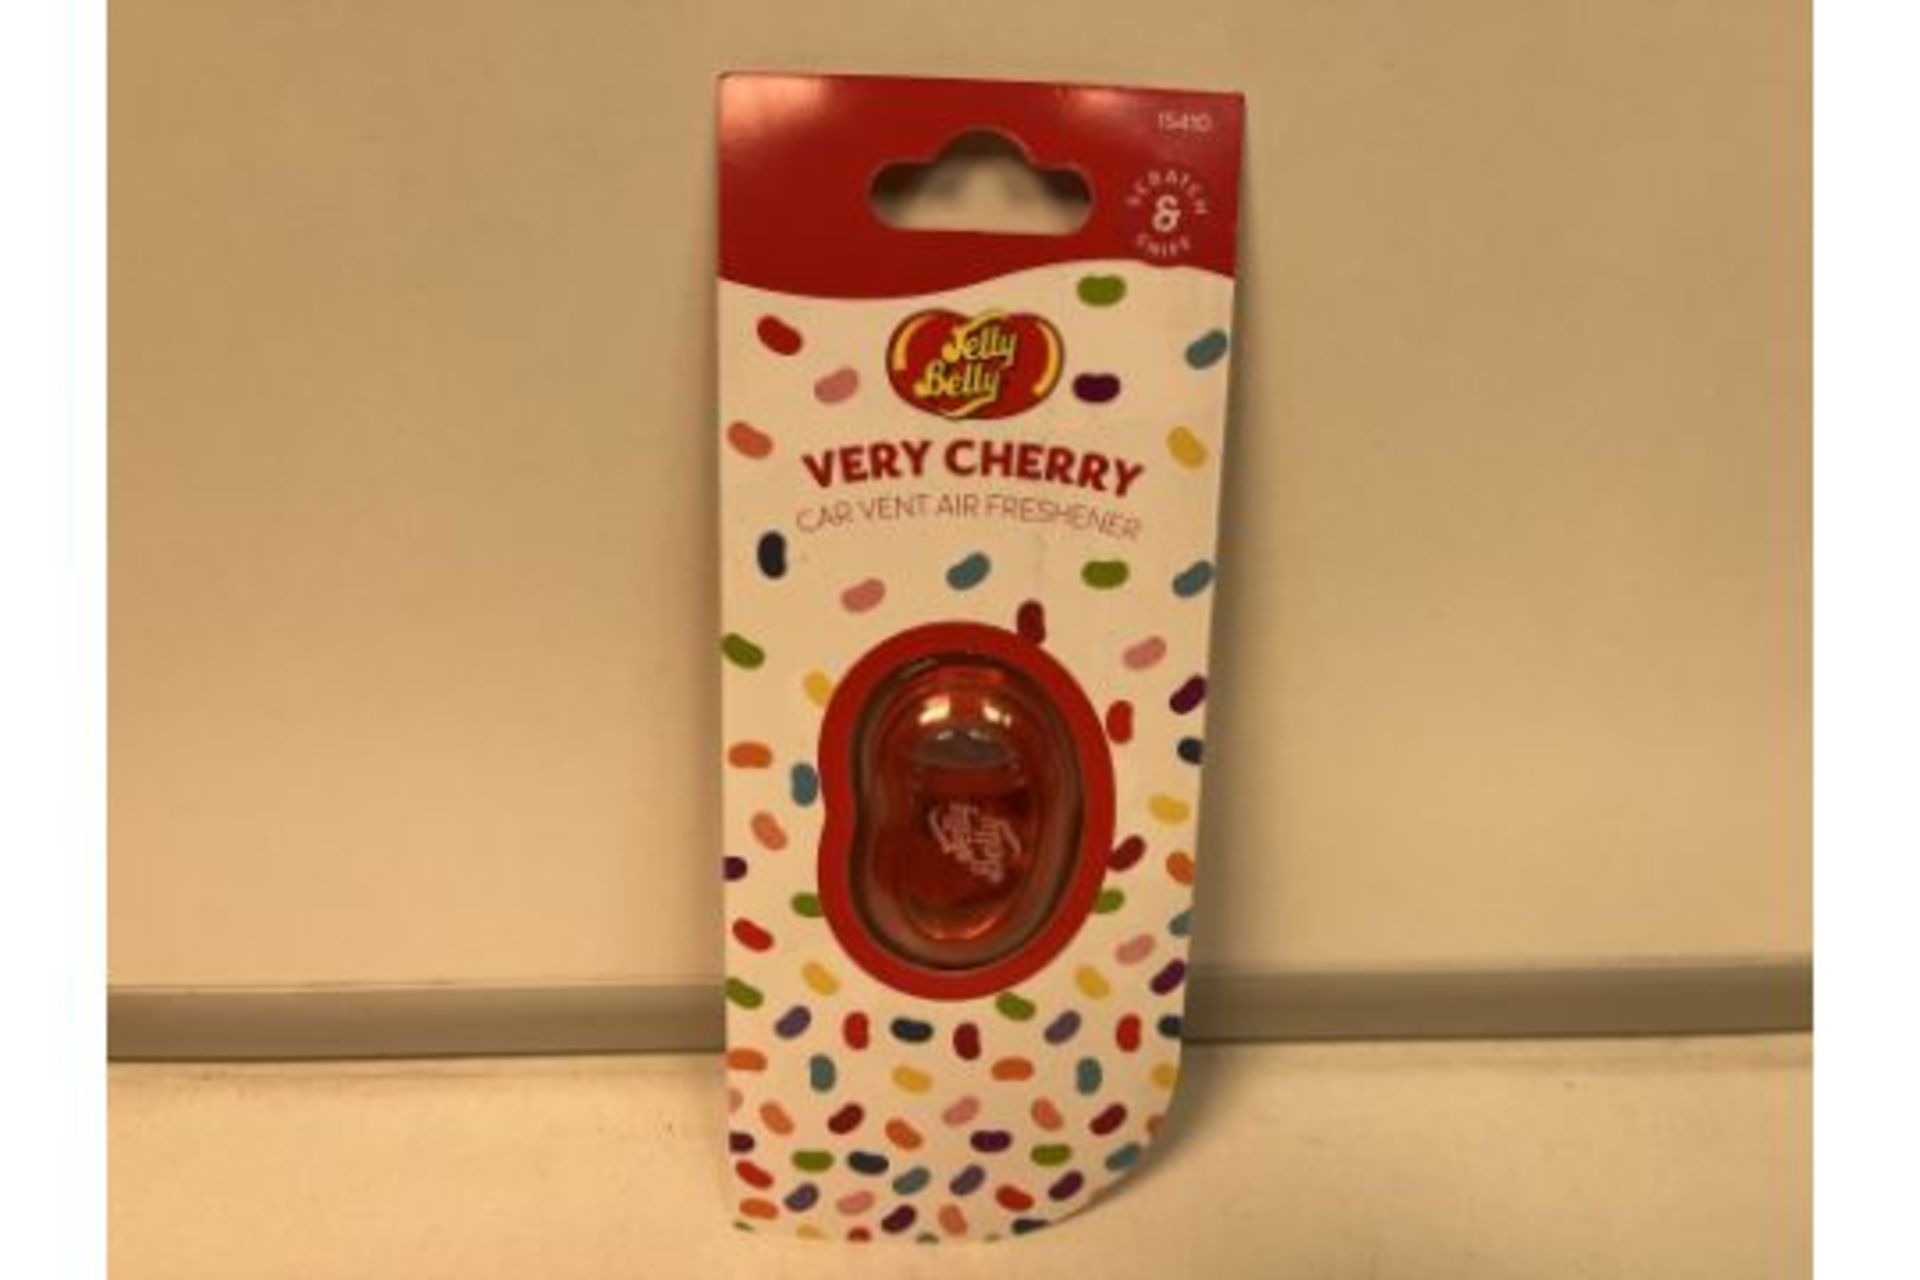 90 X BRAND NEW JELLY BELLY VERRY CHERRY CAR VENT AIR FRESHENERS RRP £4 EACH R9